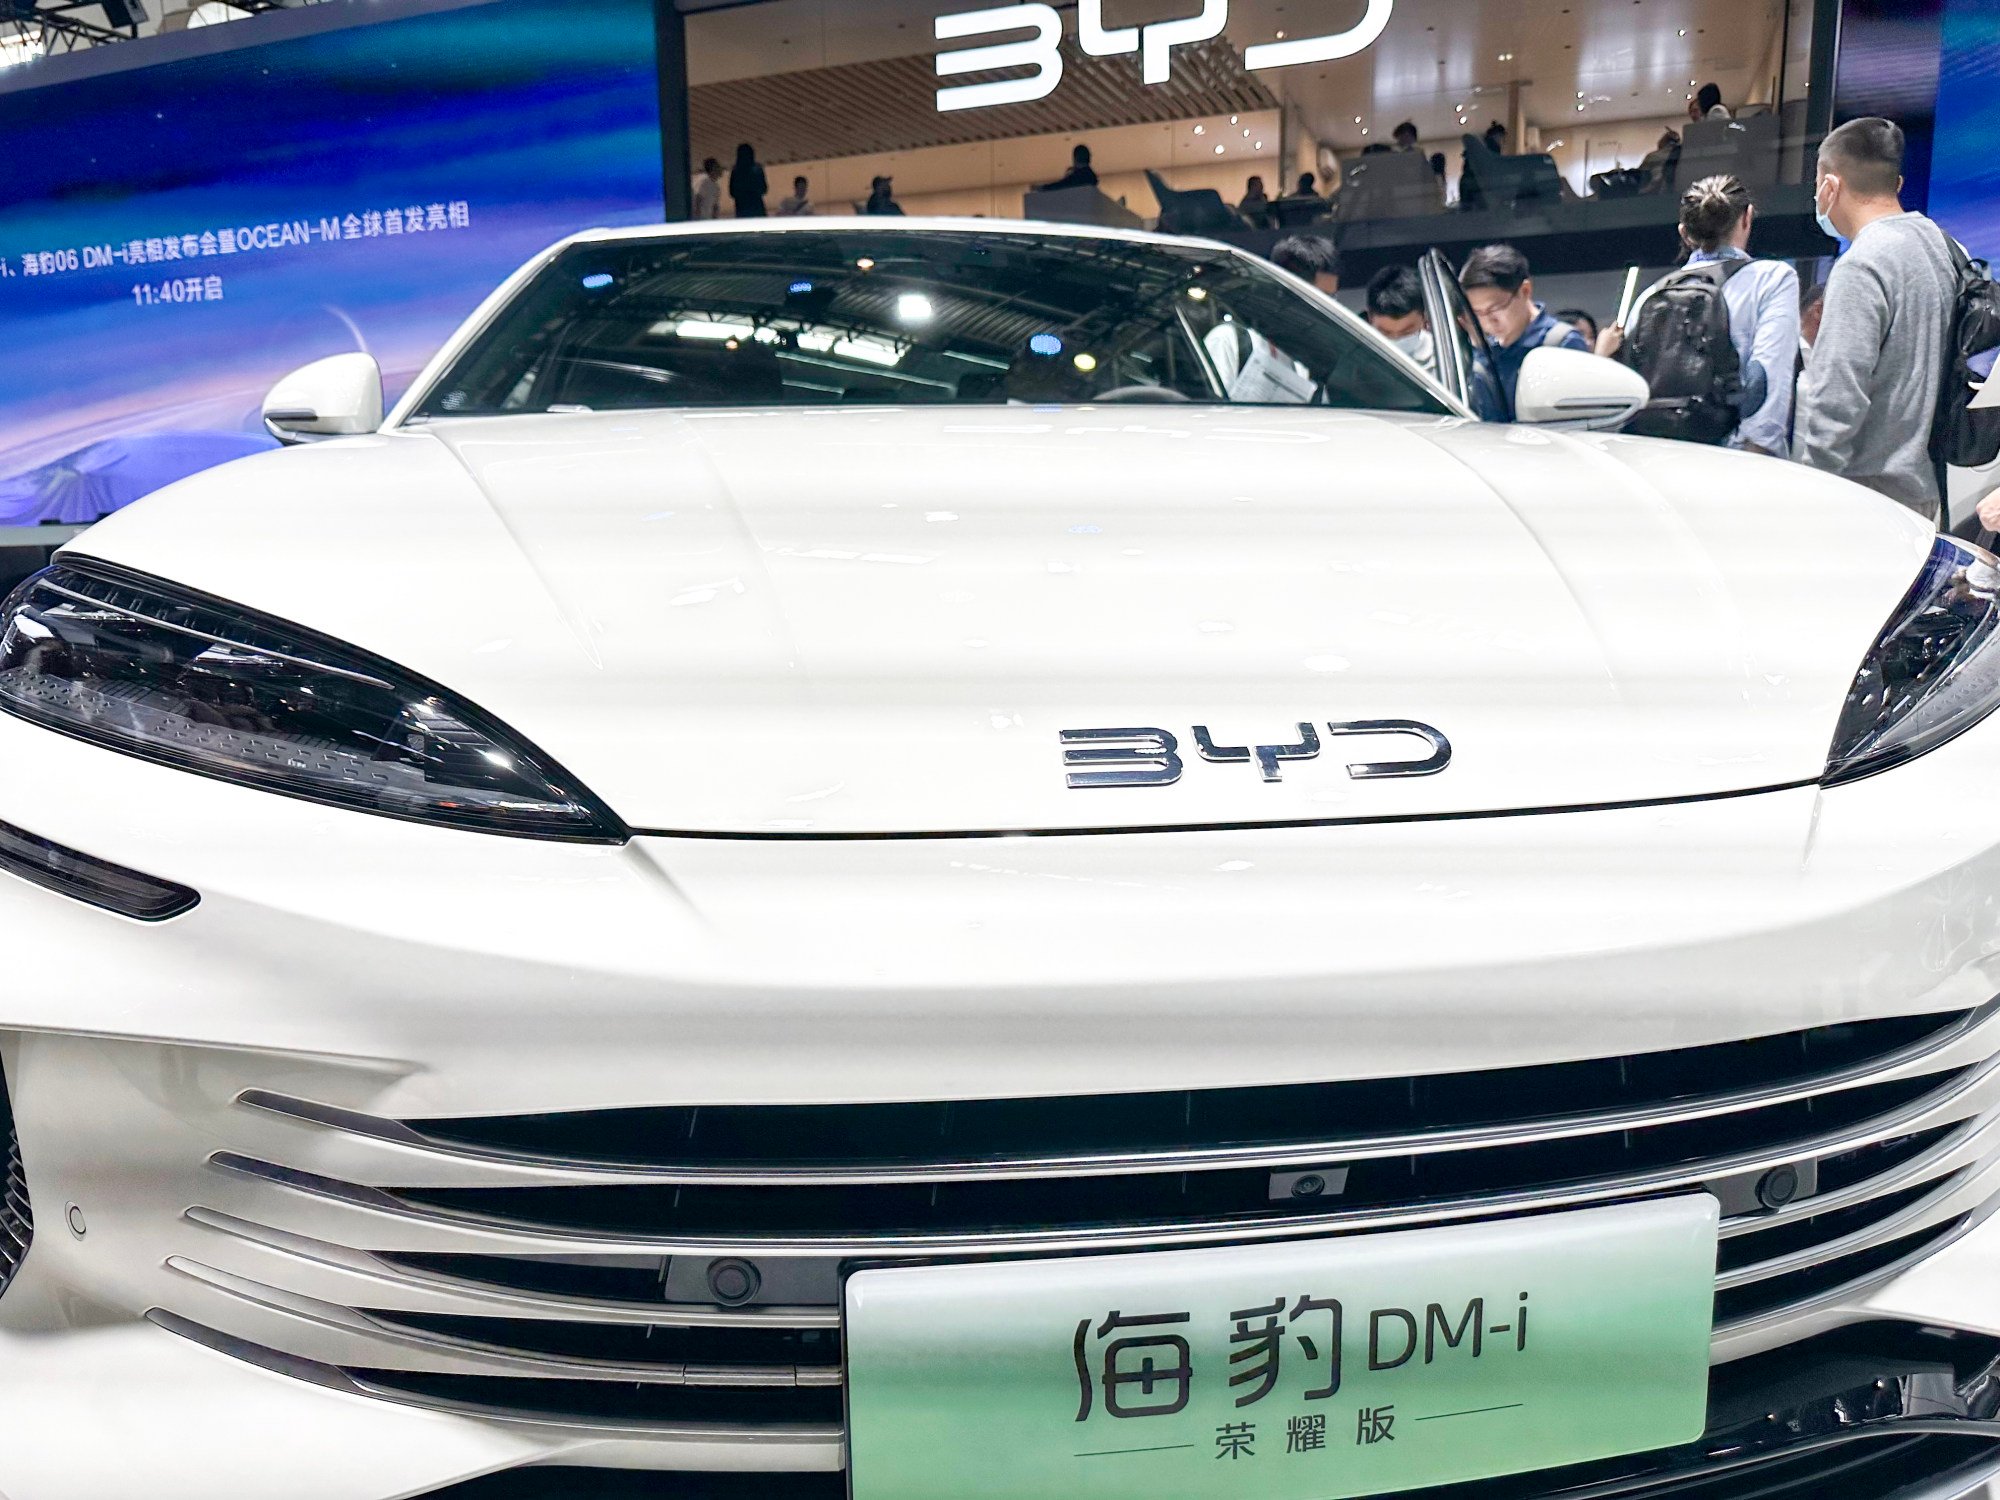 china ev price war to worsen as market share takes priority over profit, hastening demise of smaller players